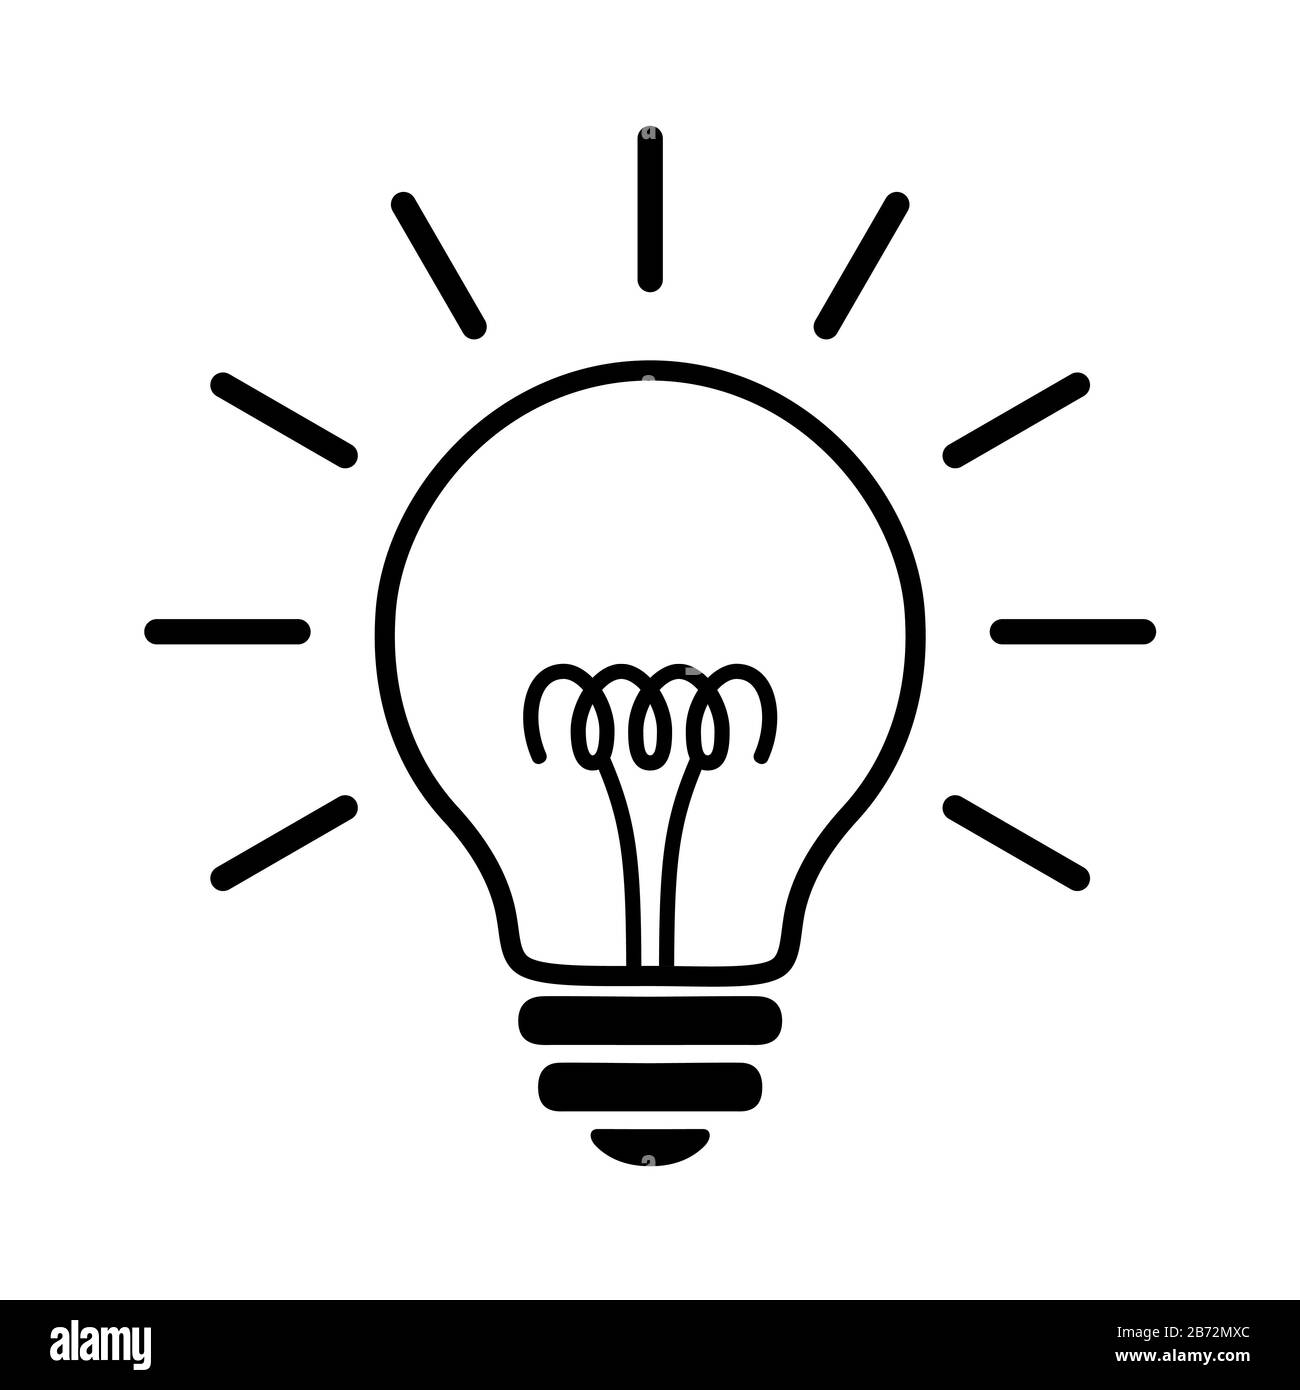 Light Bulb Line Flat Icon. Incandescent Electric Lamp With Spiral And Rays,  Simple Black Pictogram. Vector Graphic Design Element Isolated On White  Stock Vector Image & Art - Alamy